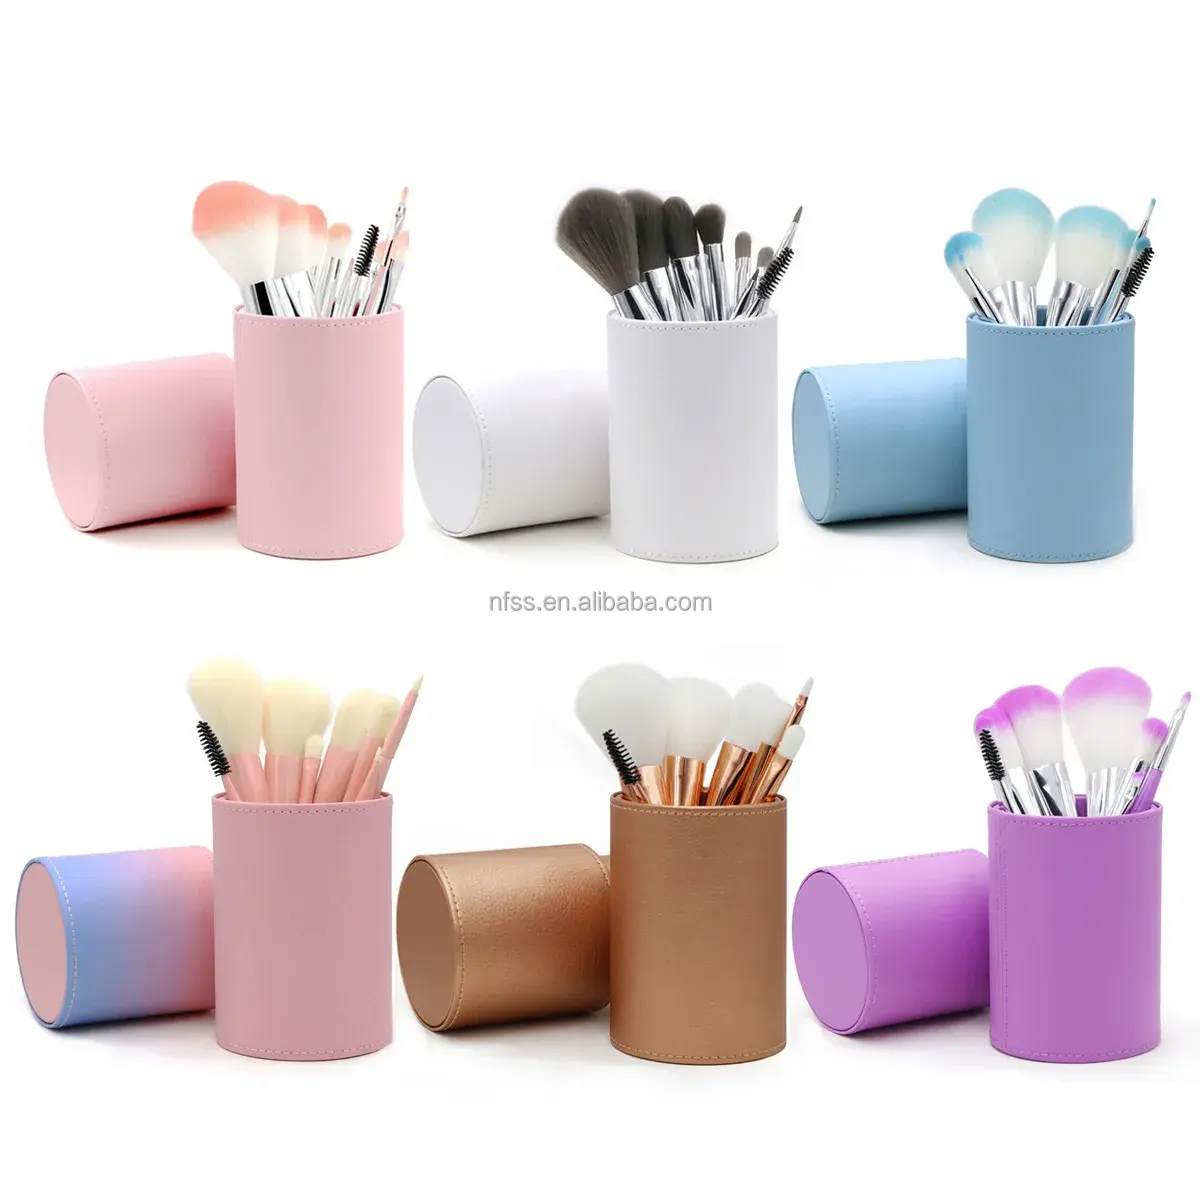 Custom Male Up Brushes Sets Or Standard Good Price Pink Makeup Brush Set With Gift Holder Leather Packaging Case Bag